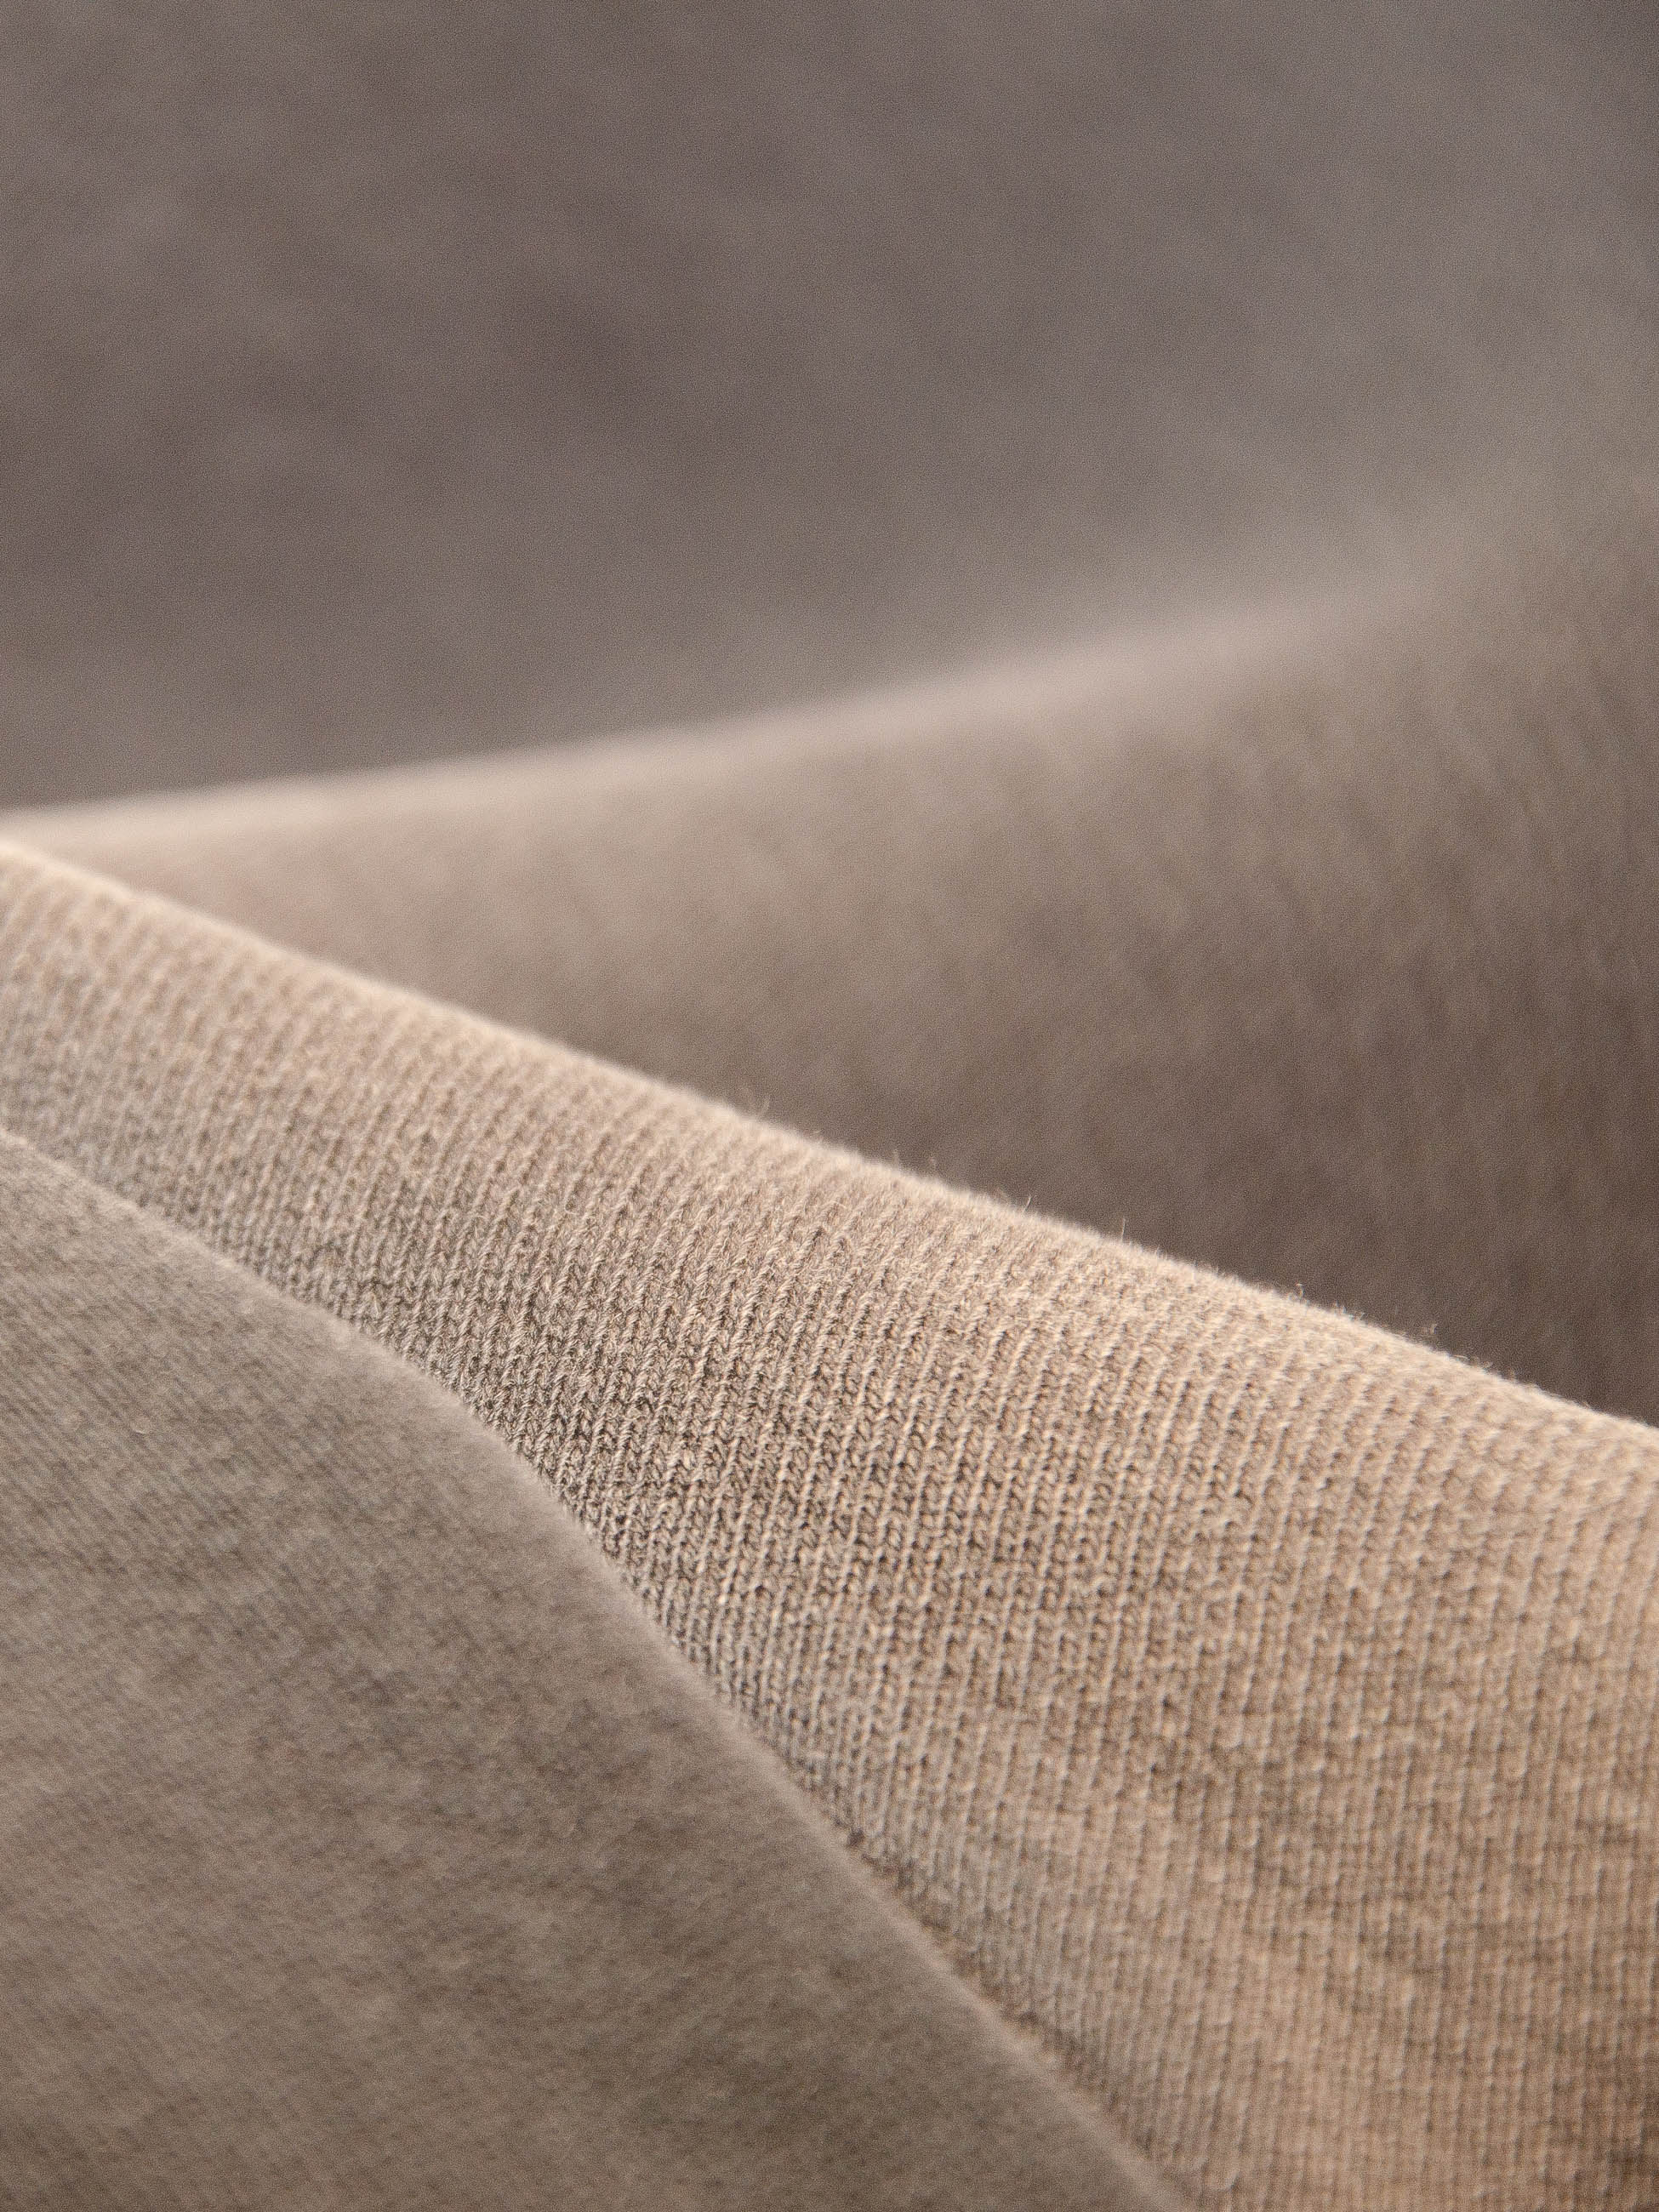 Publik Brand product fabric closest shot shown textures colors Luxury Made in USA